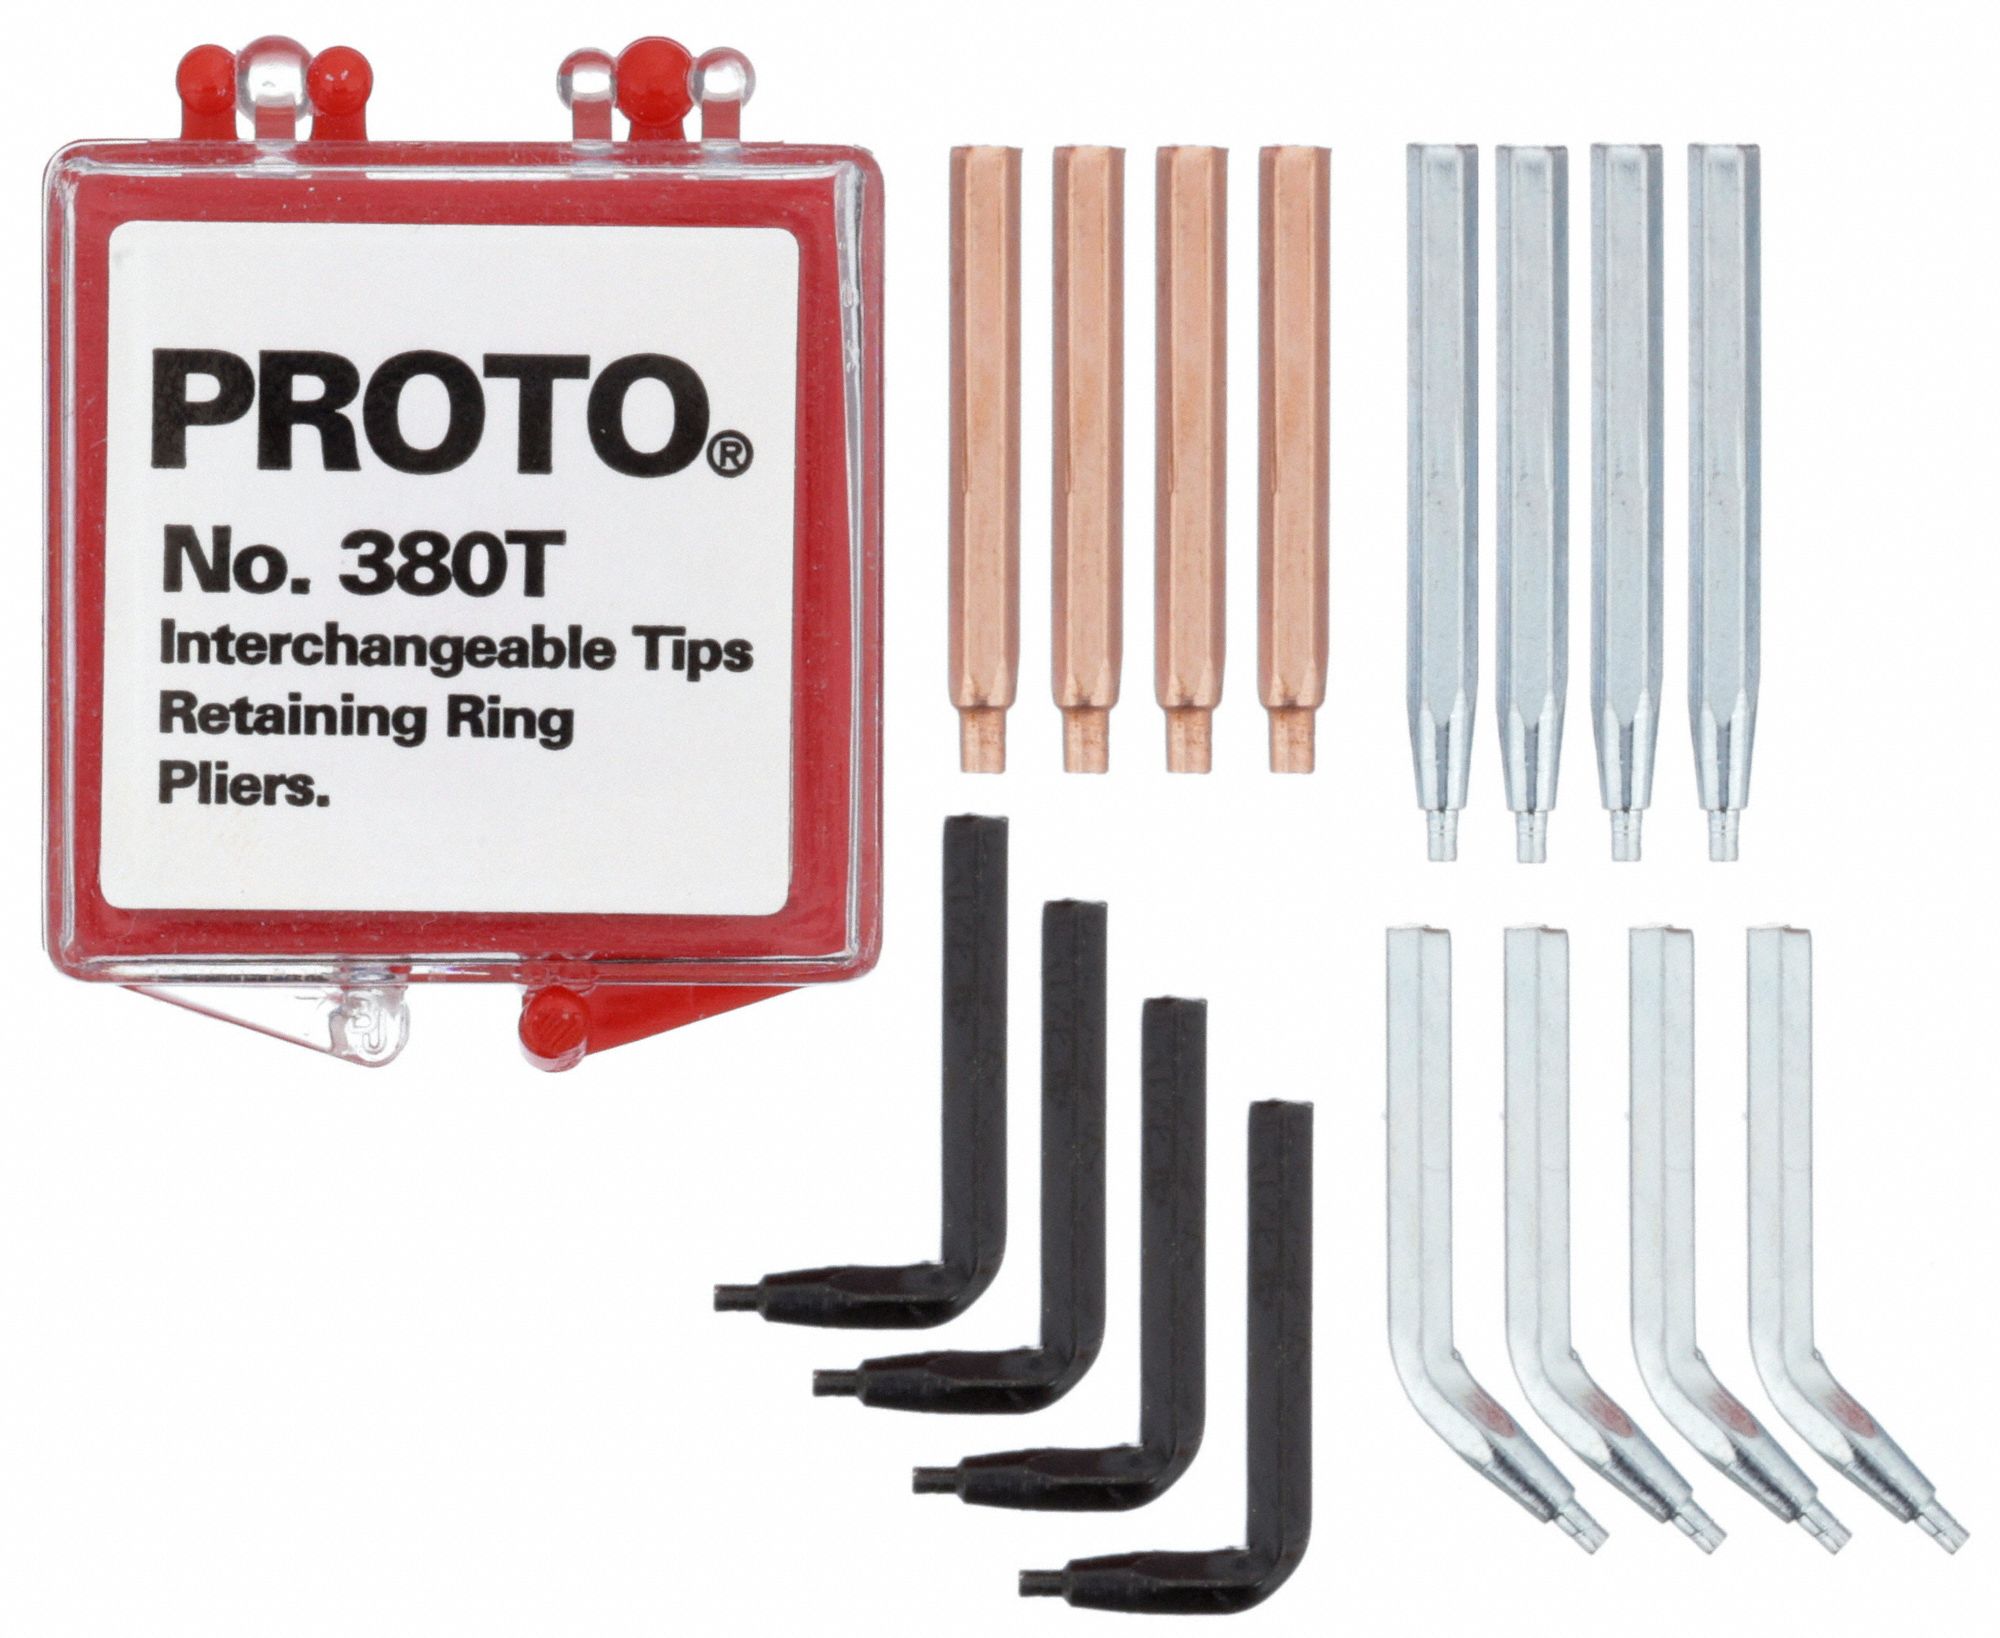 Proto 18 Piece Small Pliers Set With Replaceable Tips � PRTJ380